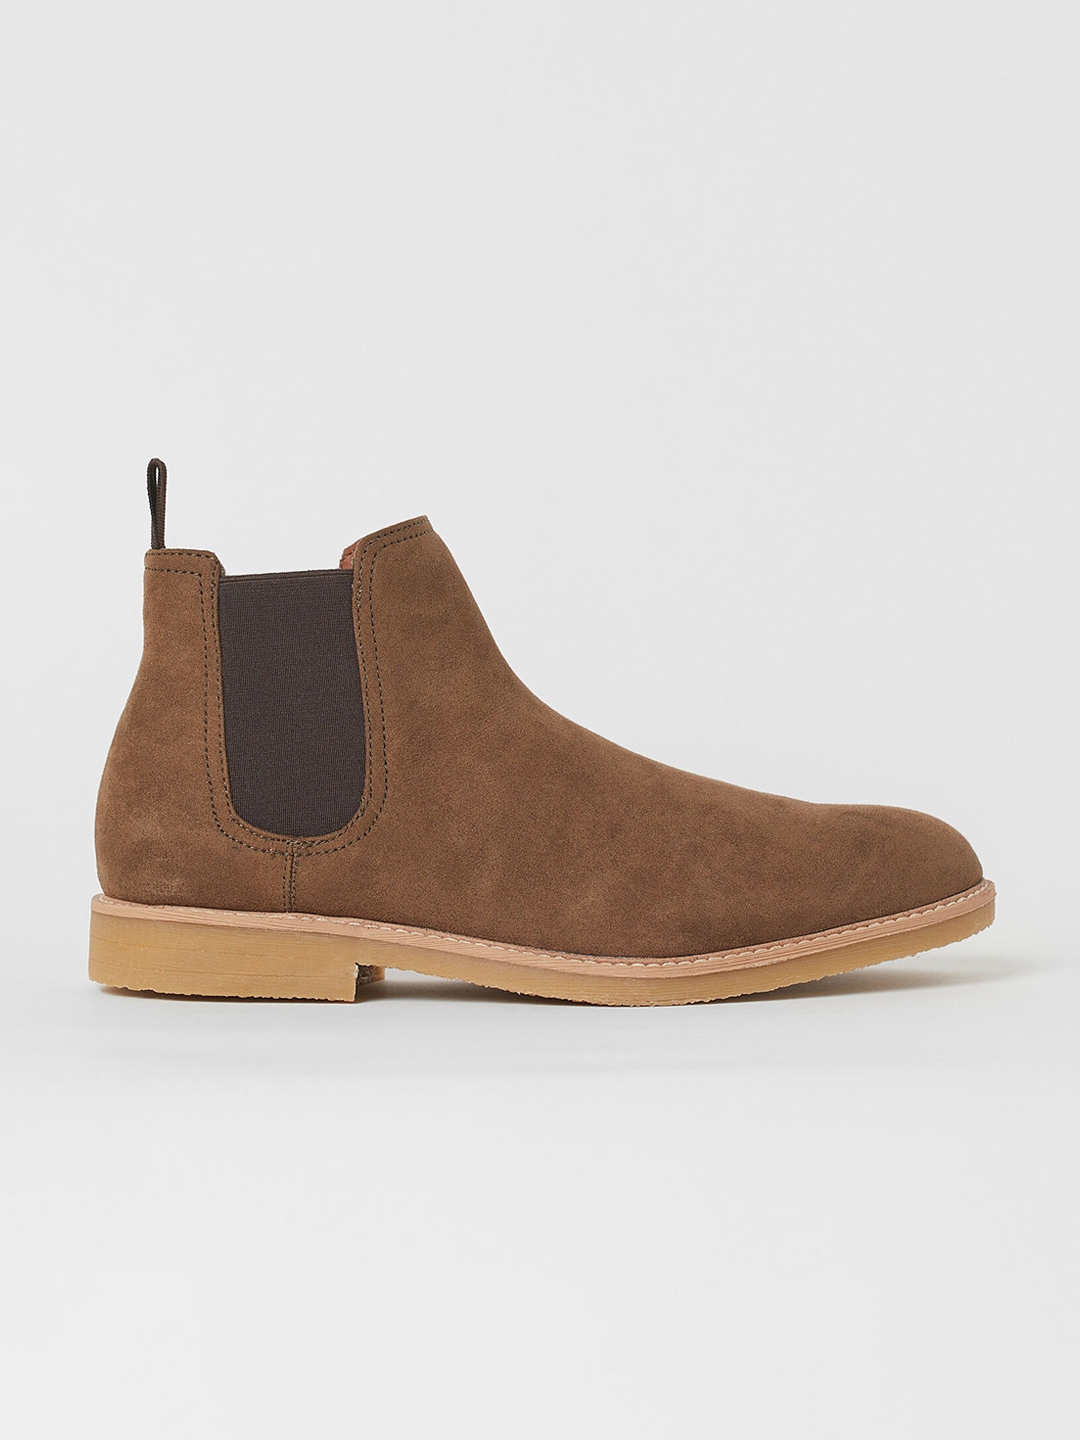 Buy H&M Men Brown Chelsea Boots - Casual Shoes for Men 16396480 | Myntra